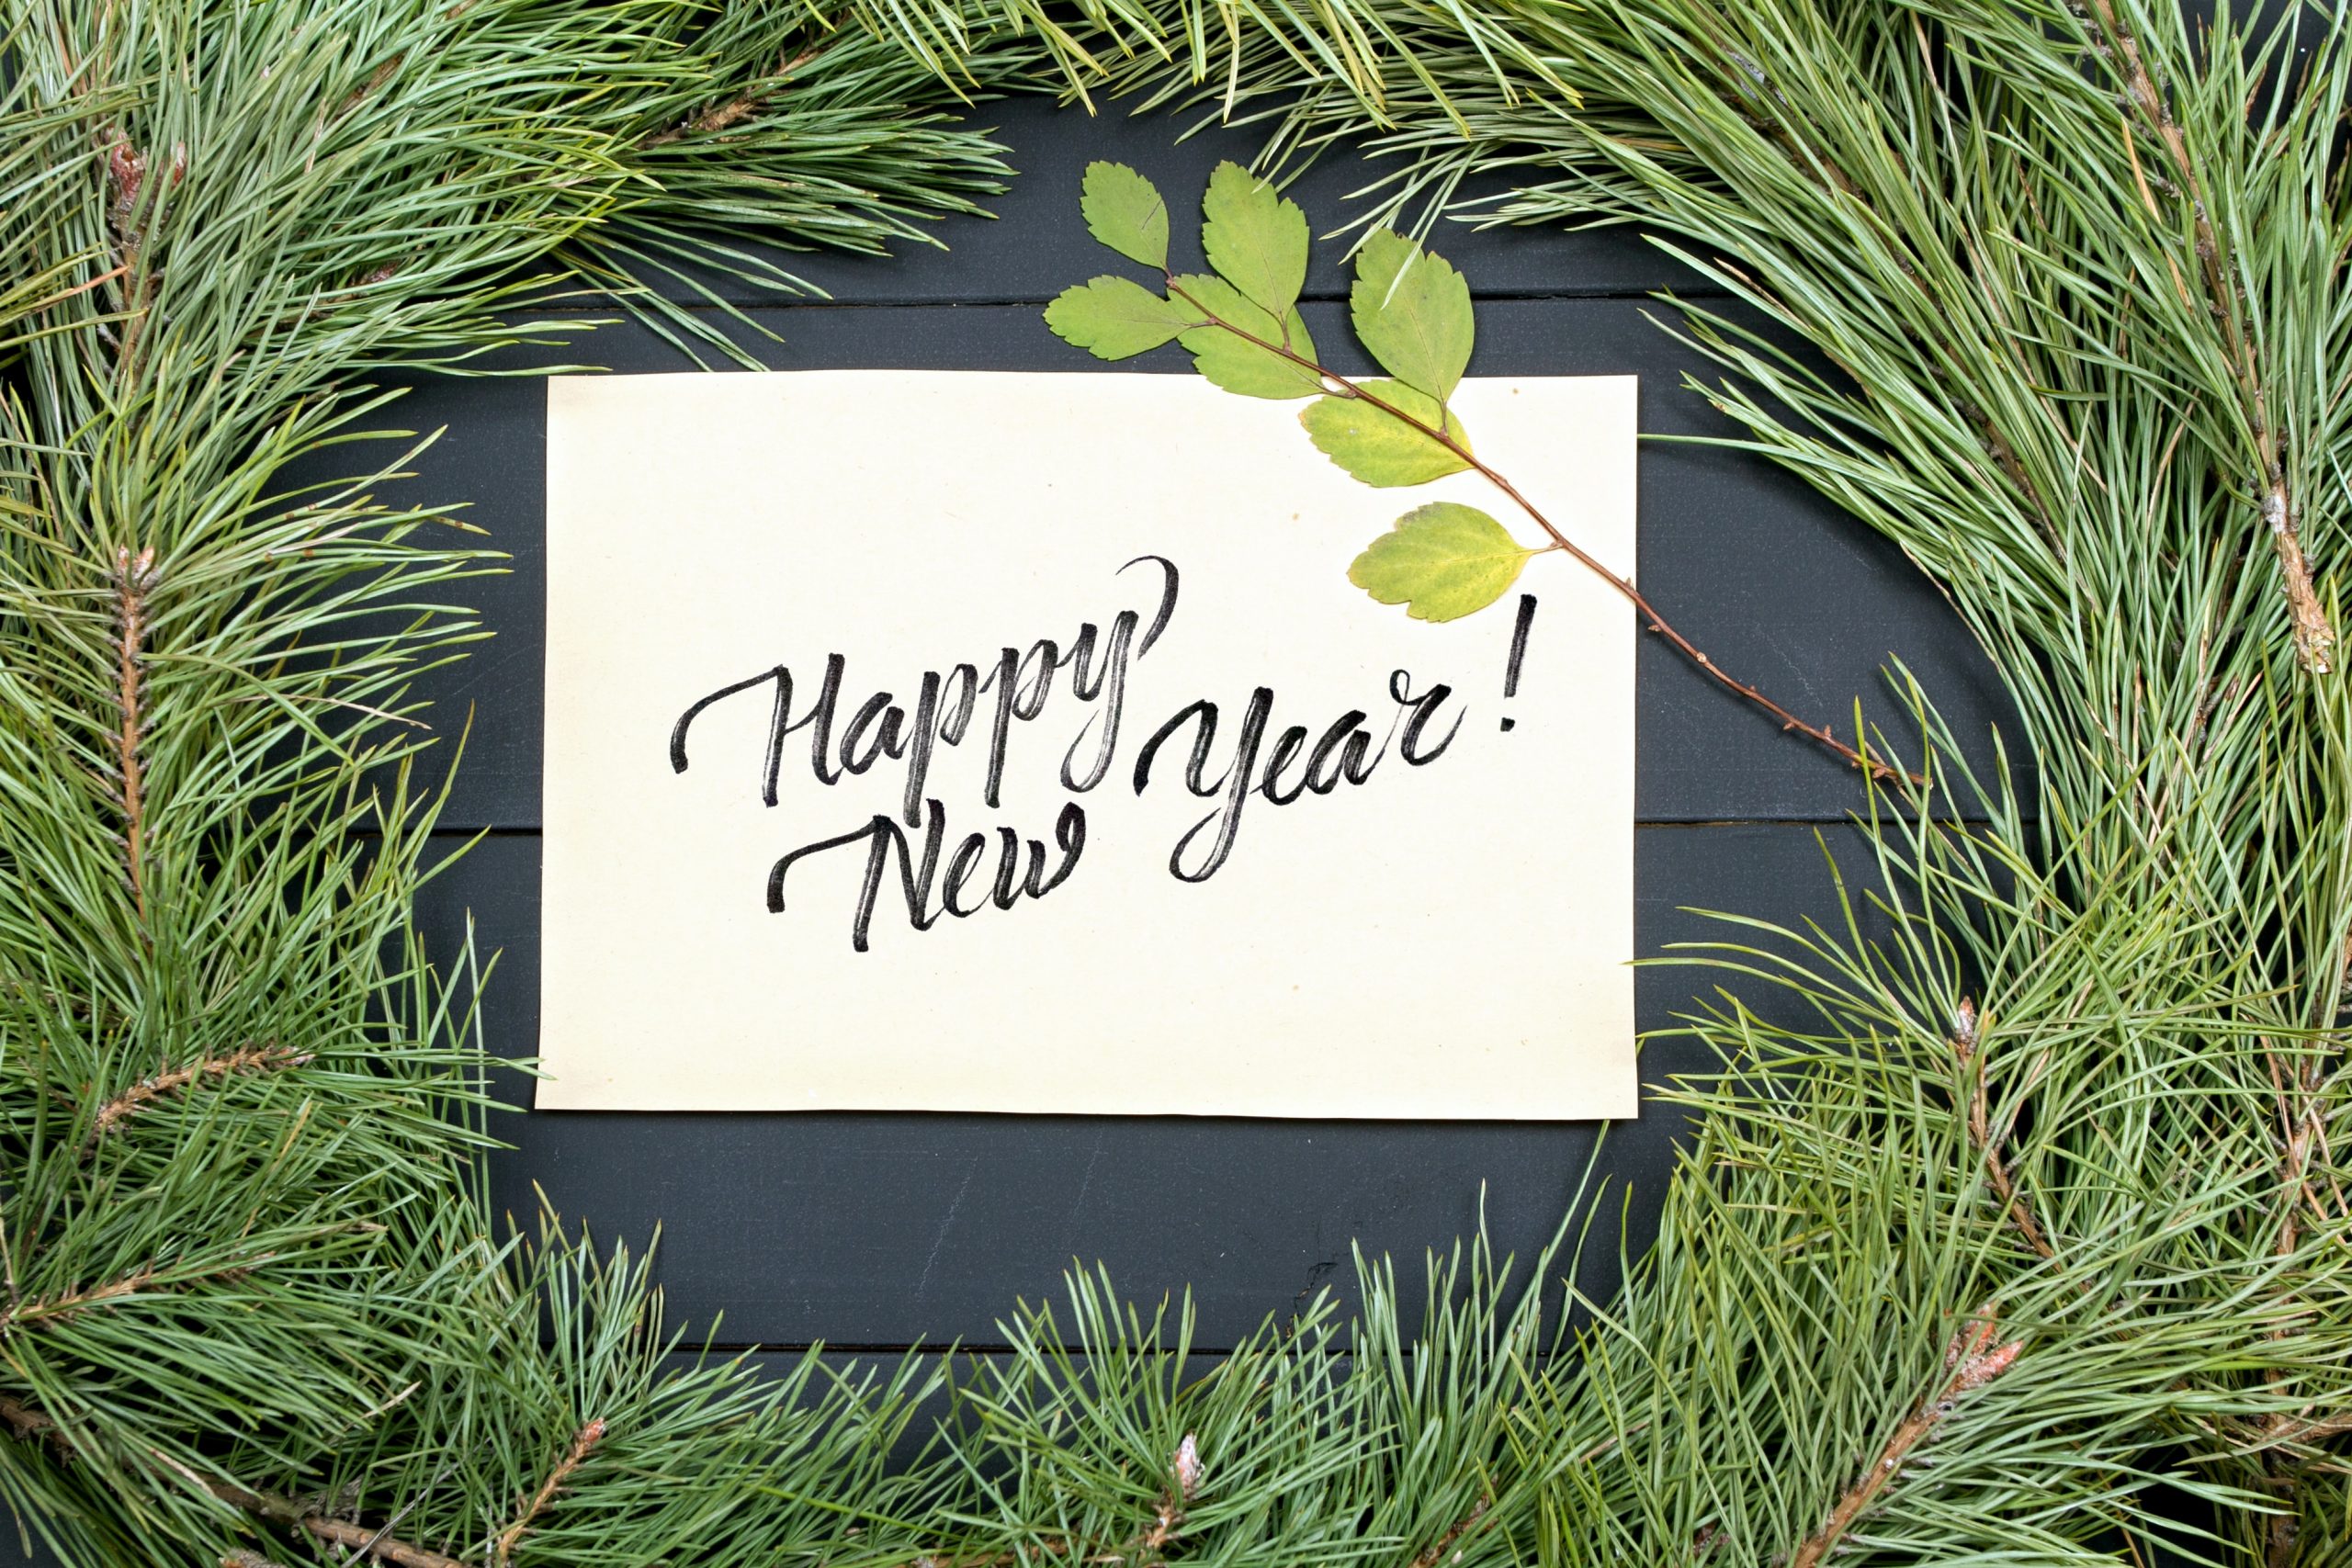 Happy New Year written out with greenery around it